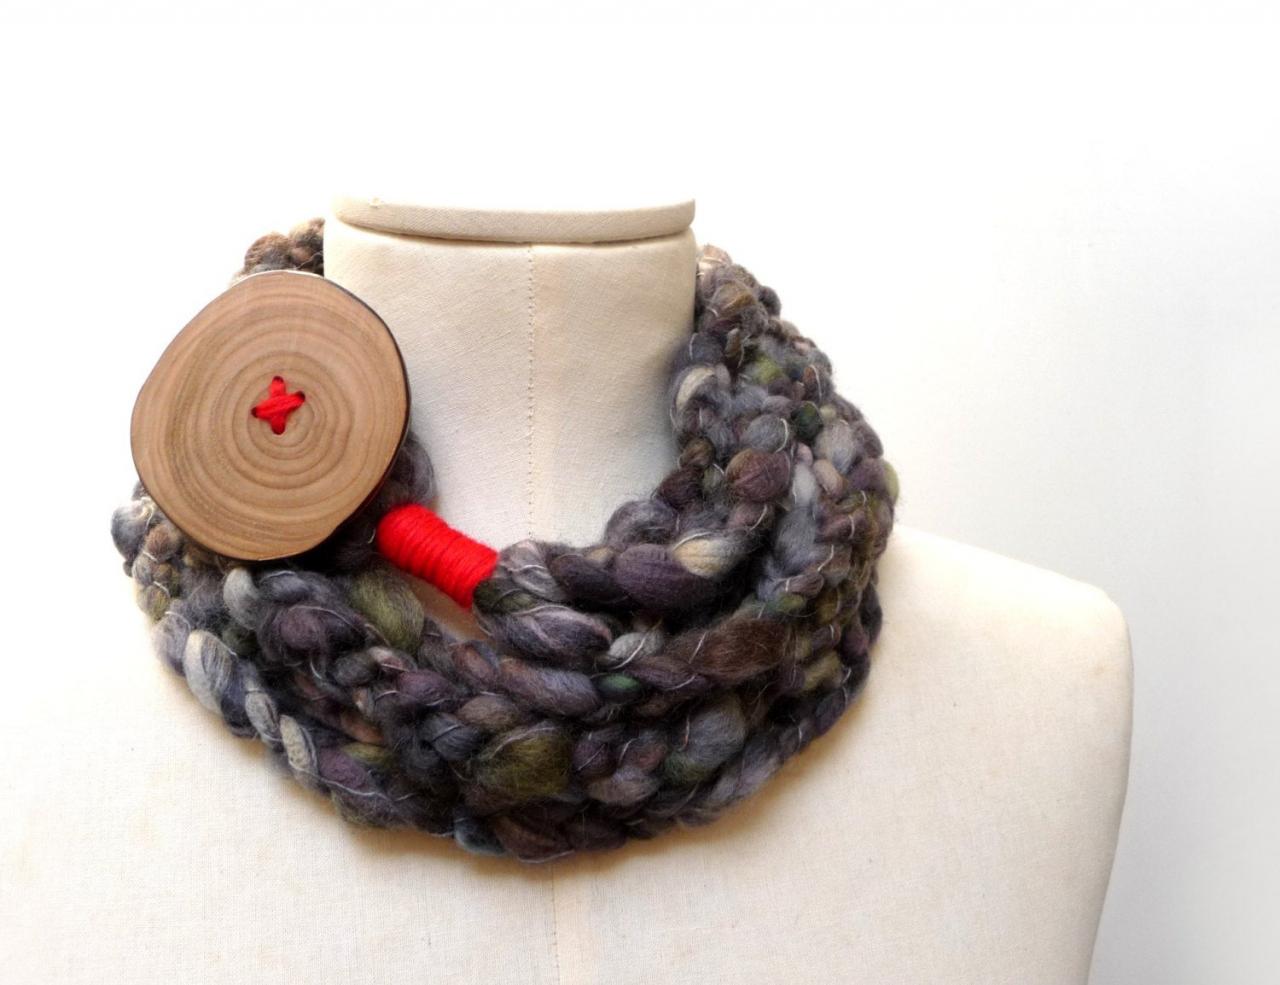 Loop Infinity Scarf Necklace, Crochet Scarflette Neckwarmer - Grey, Brown, Olive Green And Red With Giant Wood Button